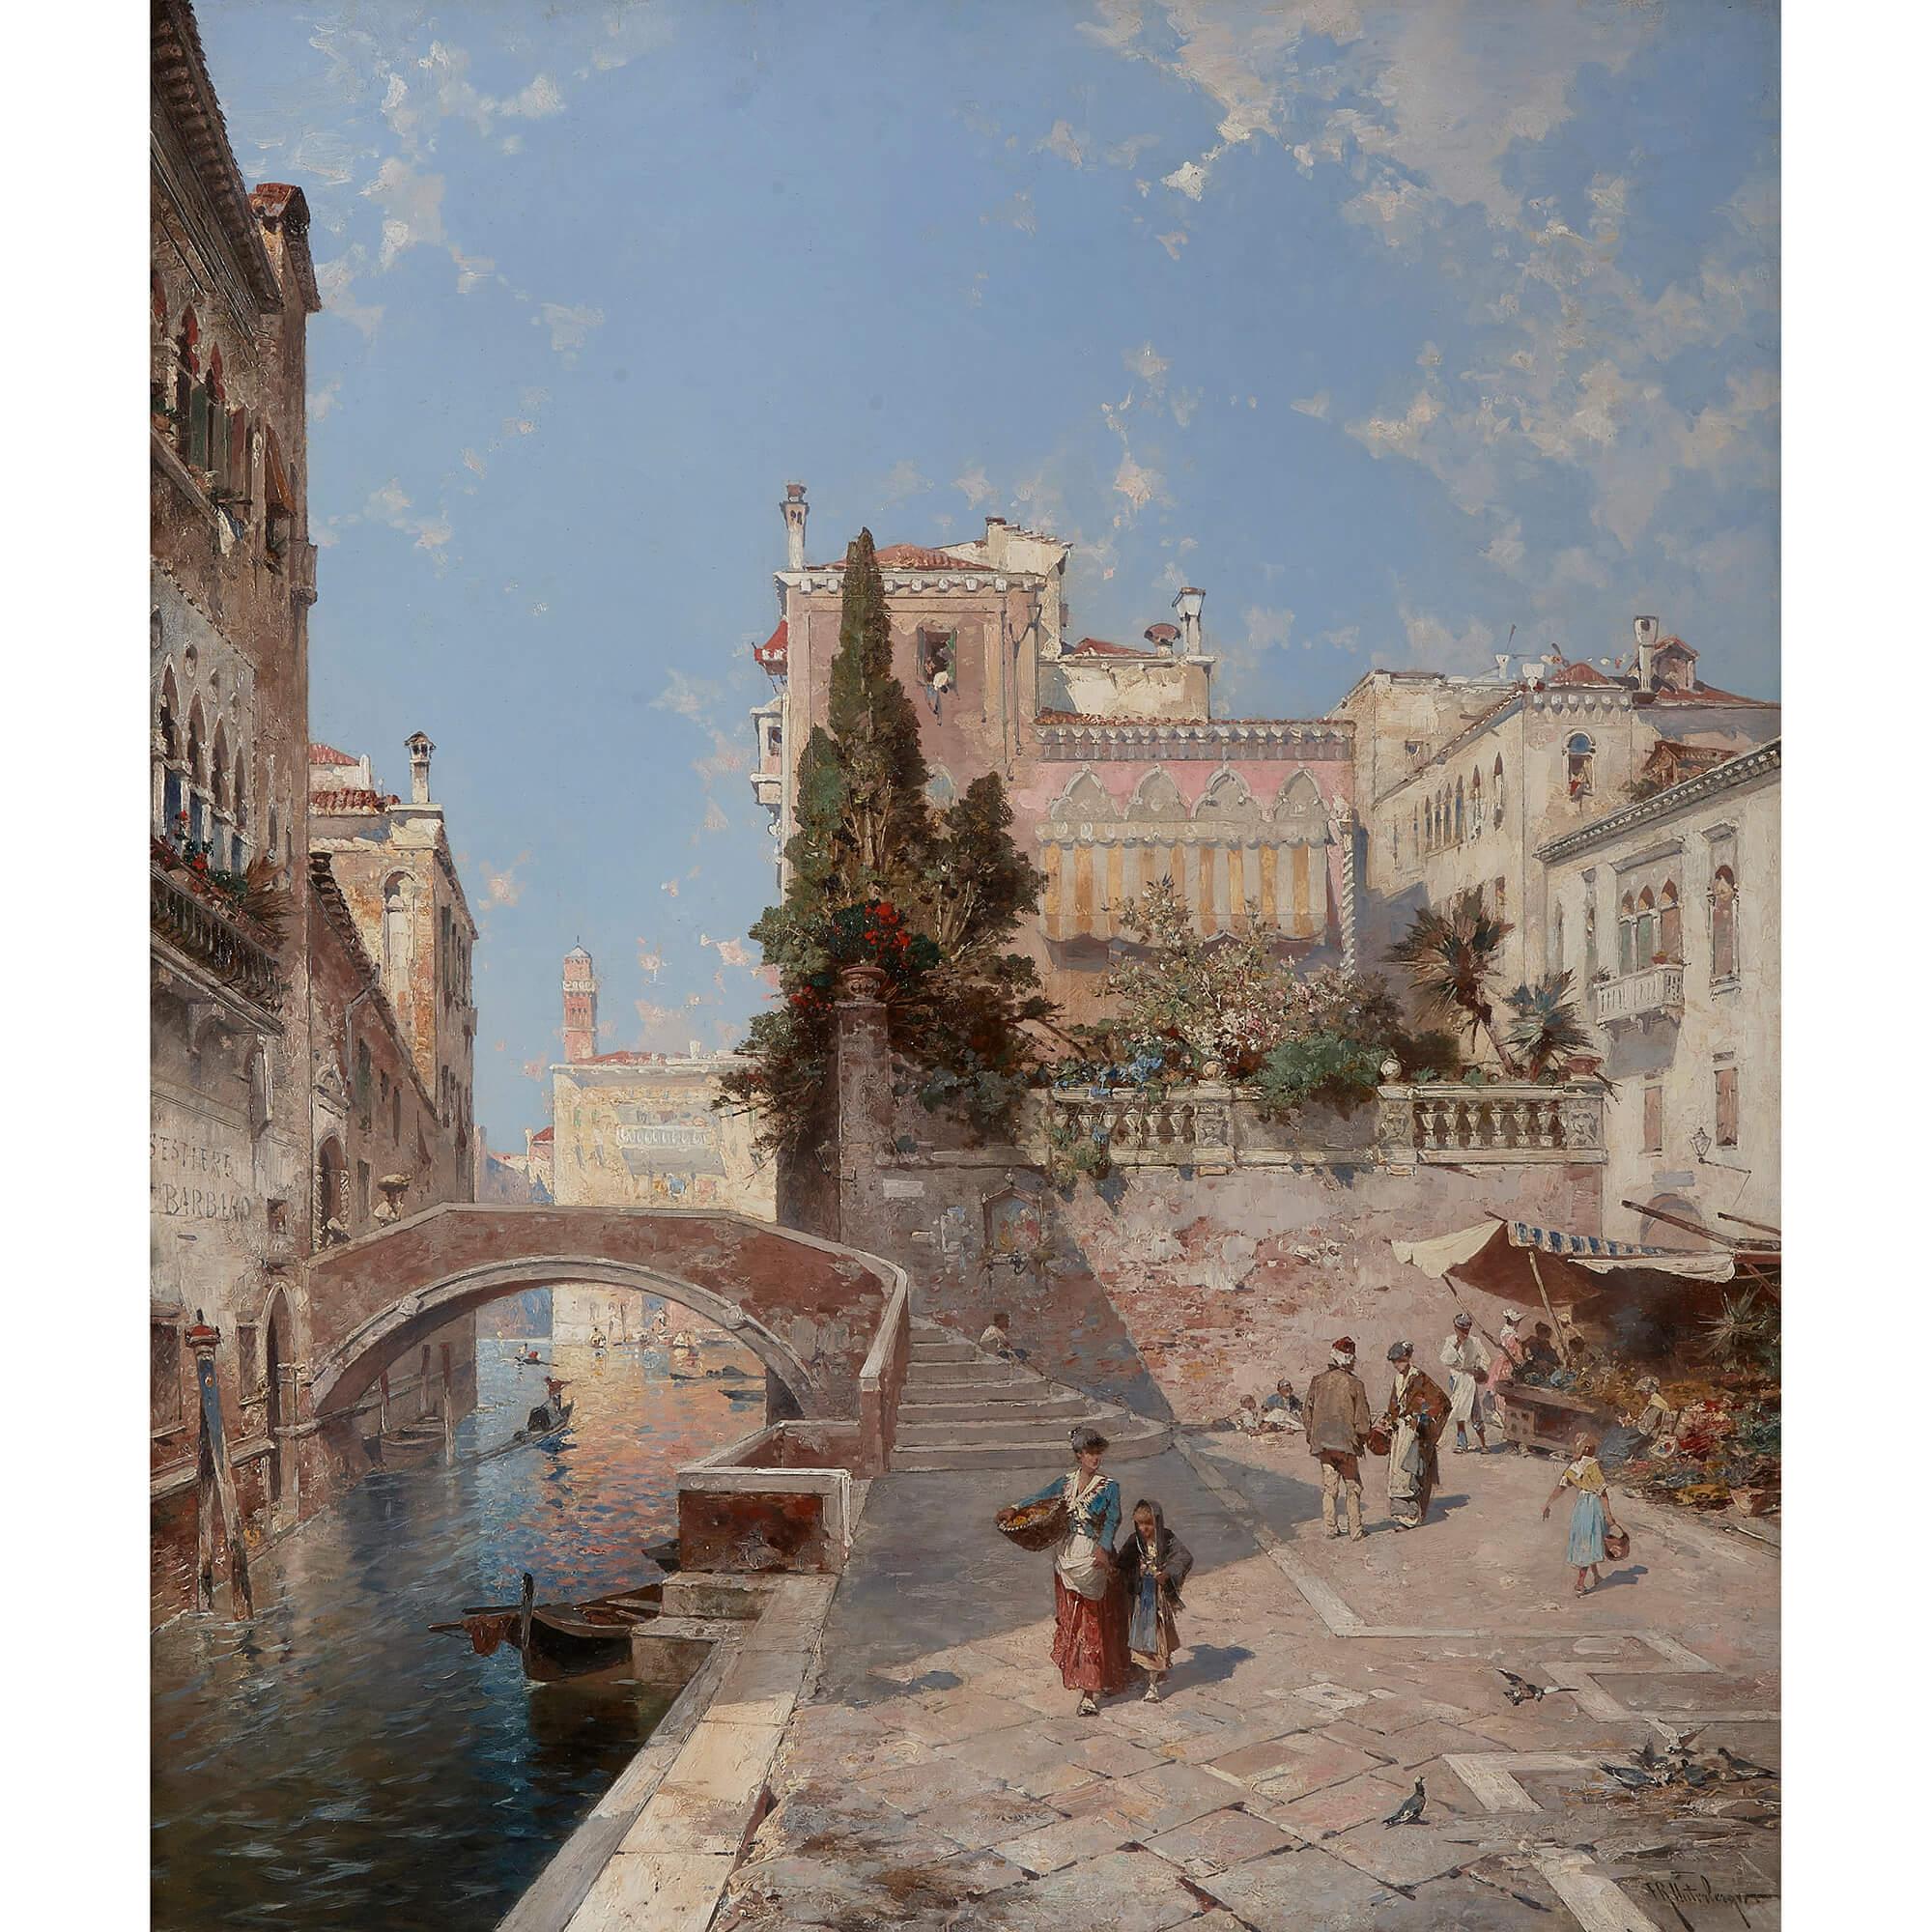 A Venetian scene of the Palazzo Dario by F. R. Unterberger - Painting by Franz Richard Unterberger